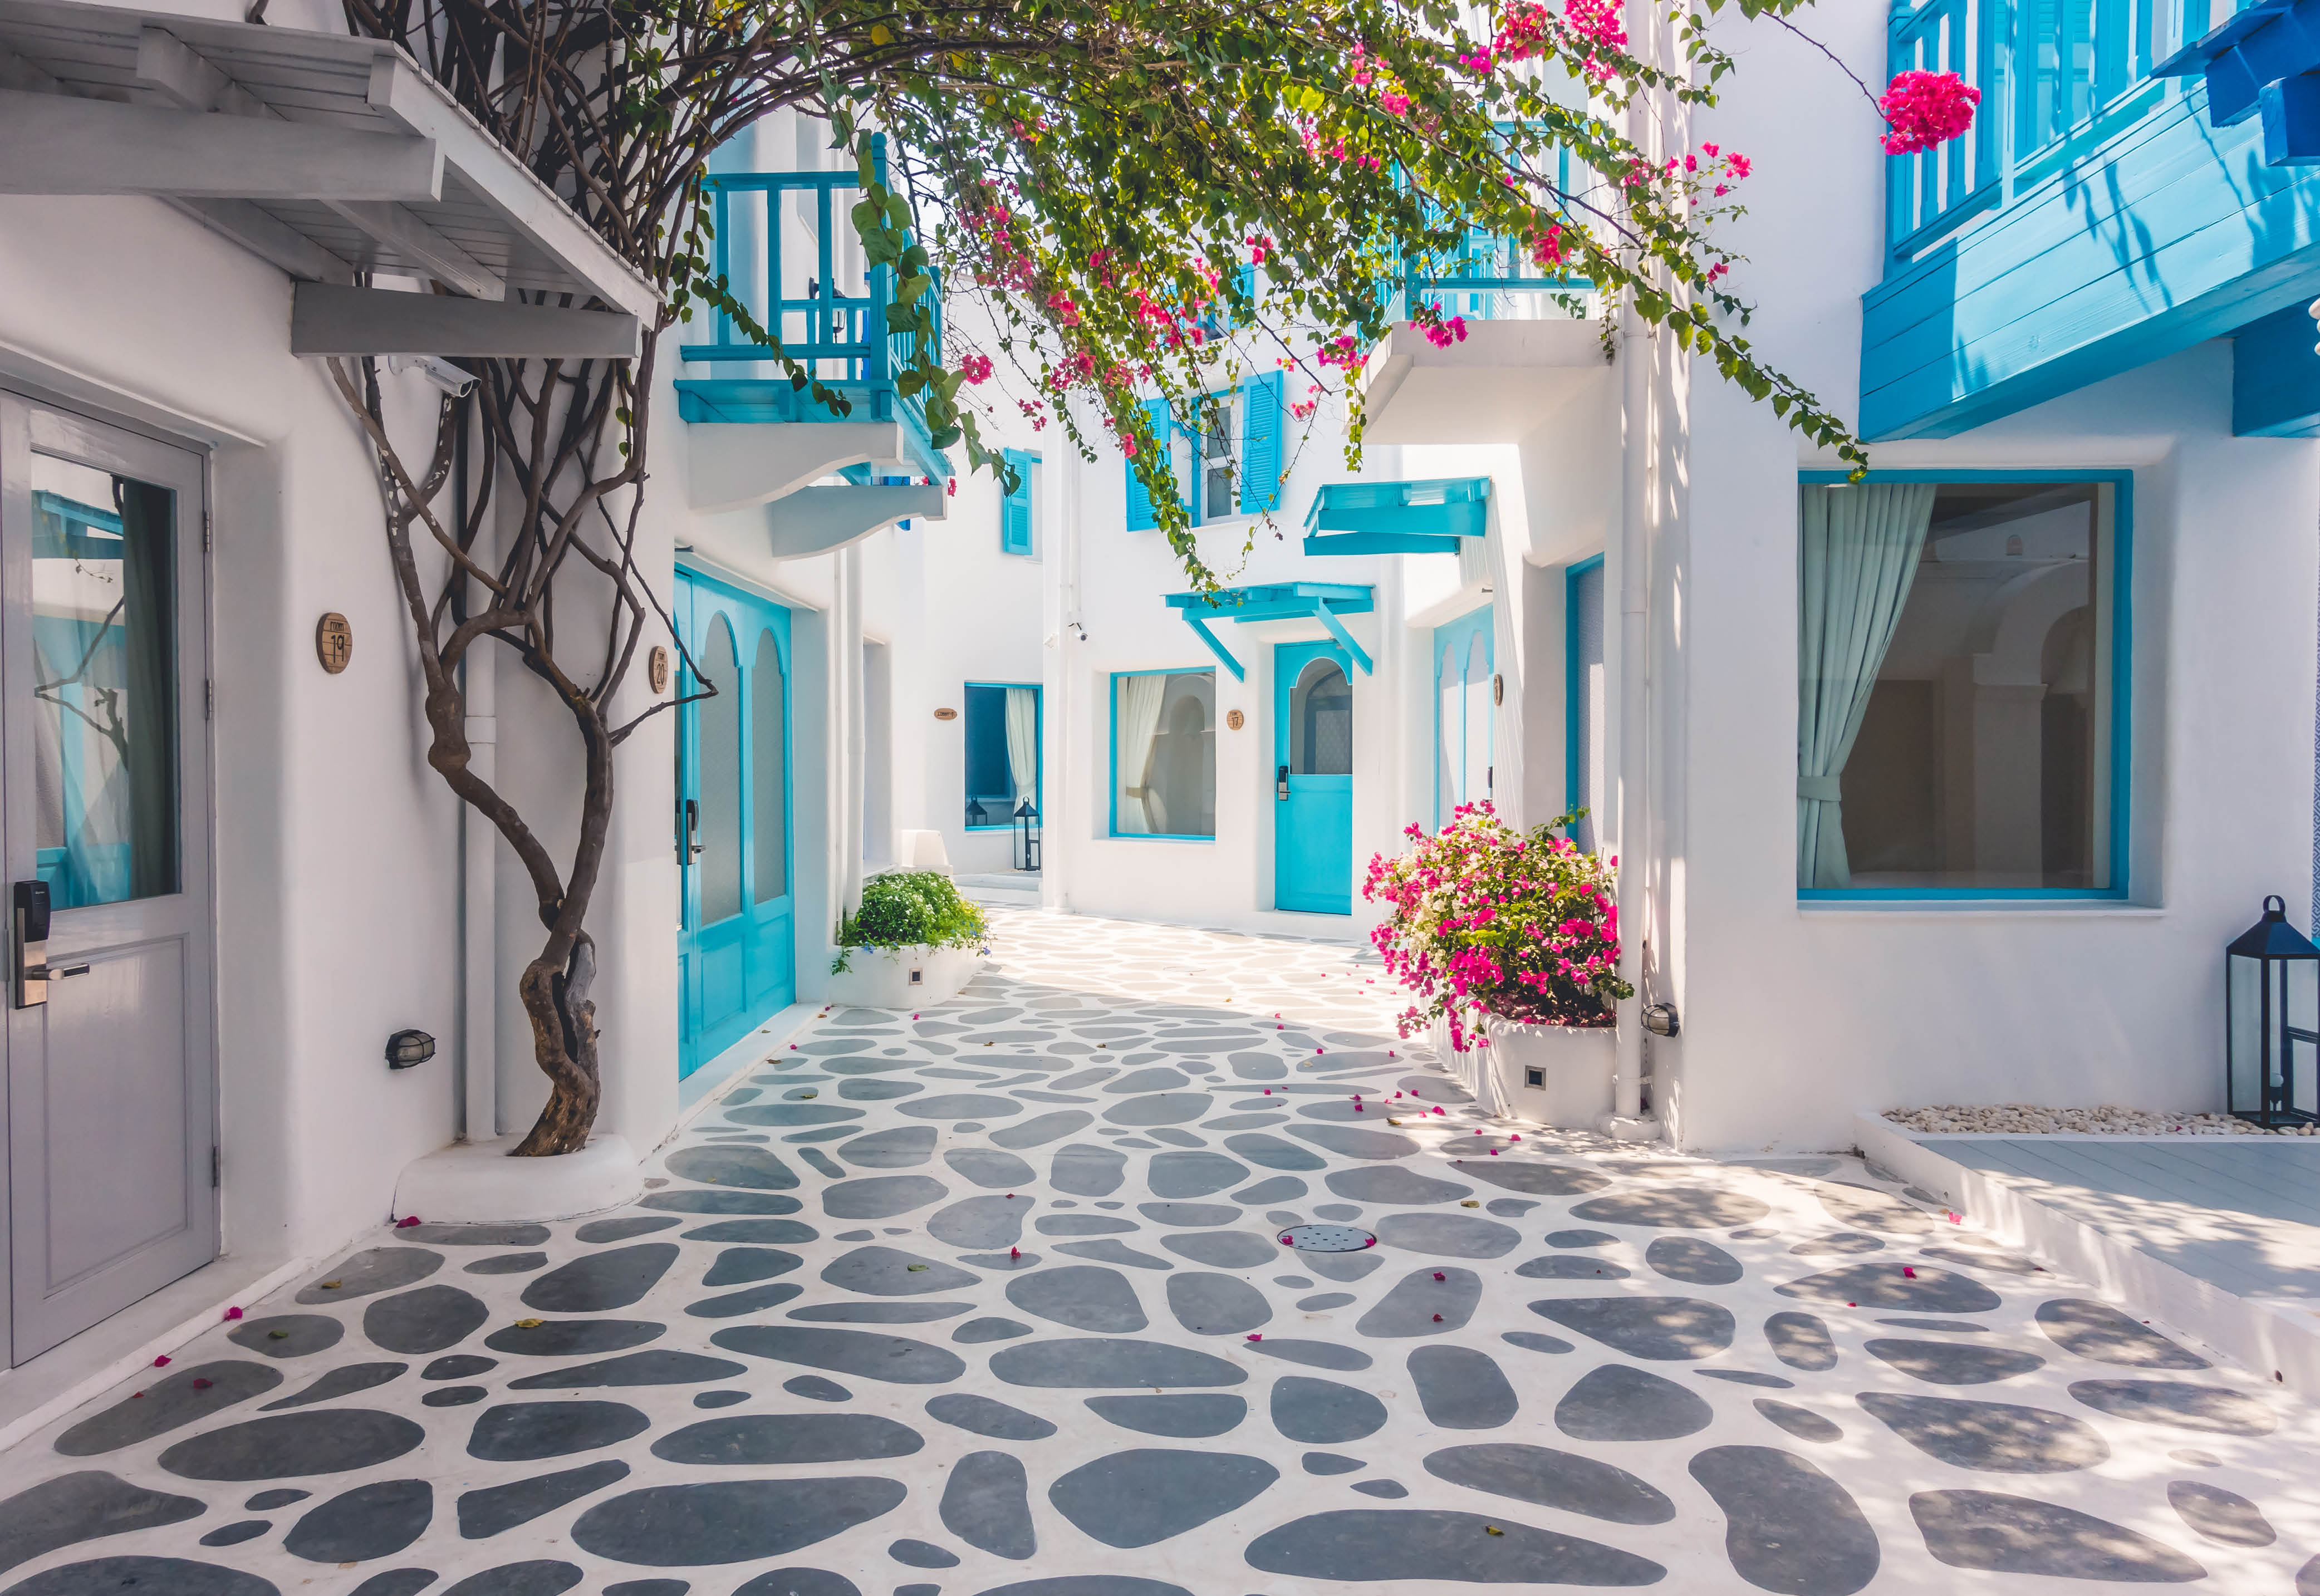 A stone street in Greece surrounded by white buildings with blue doors and windows